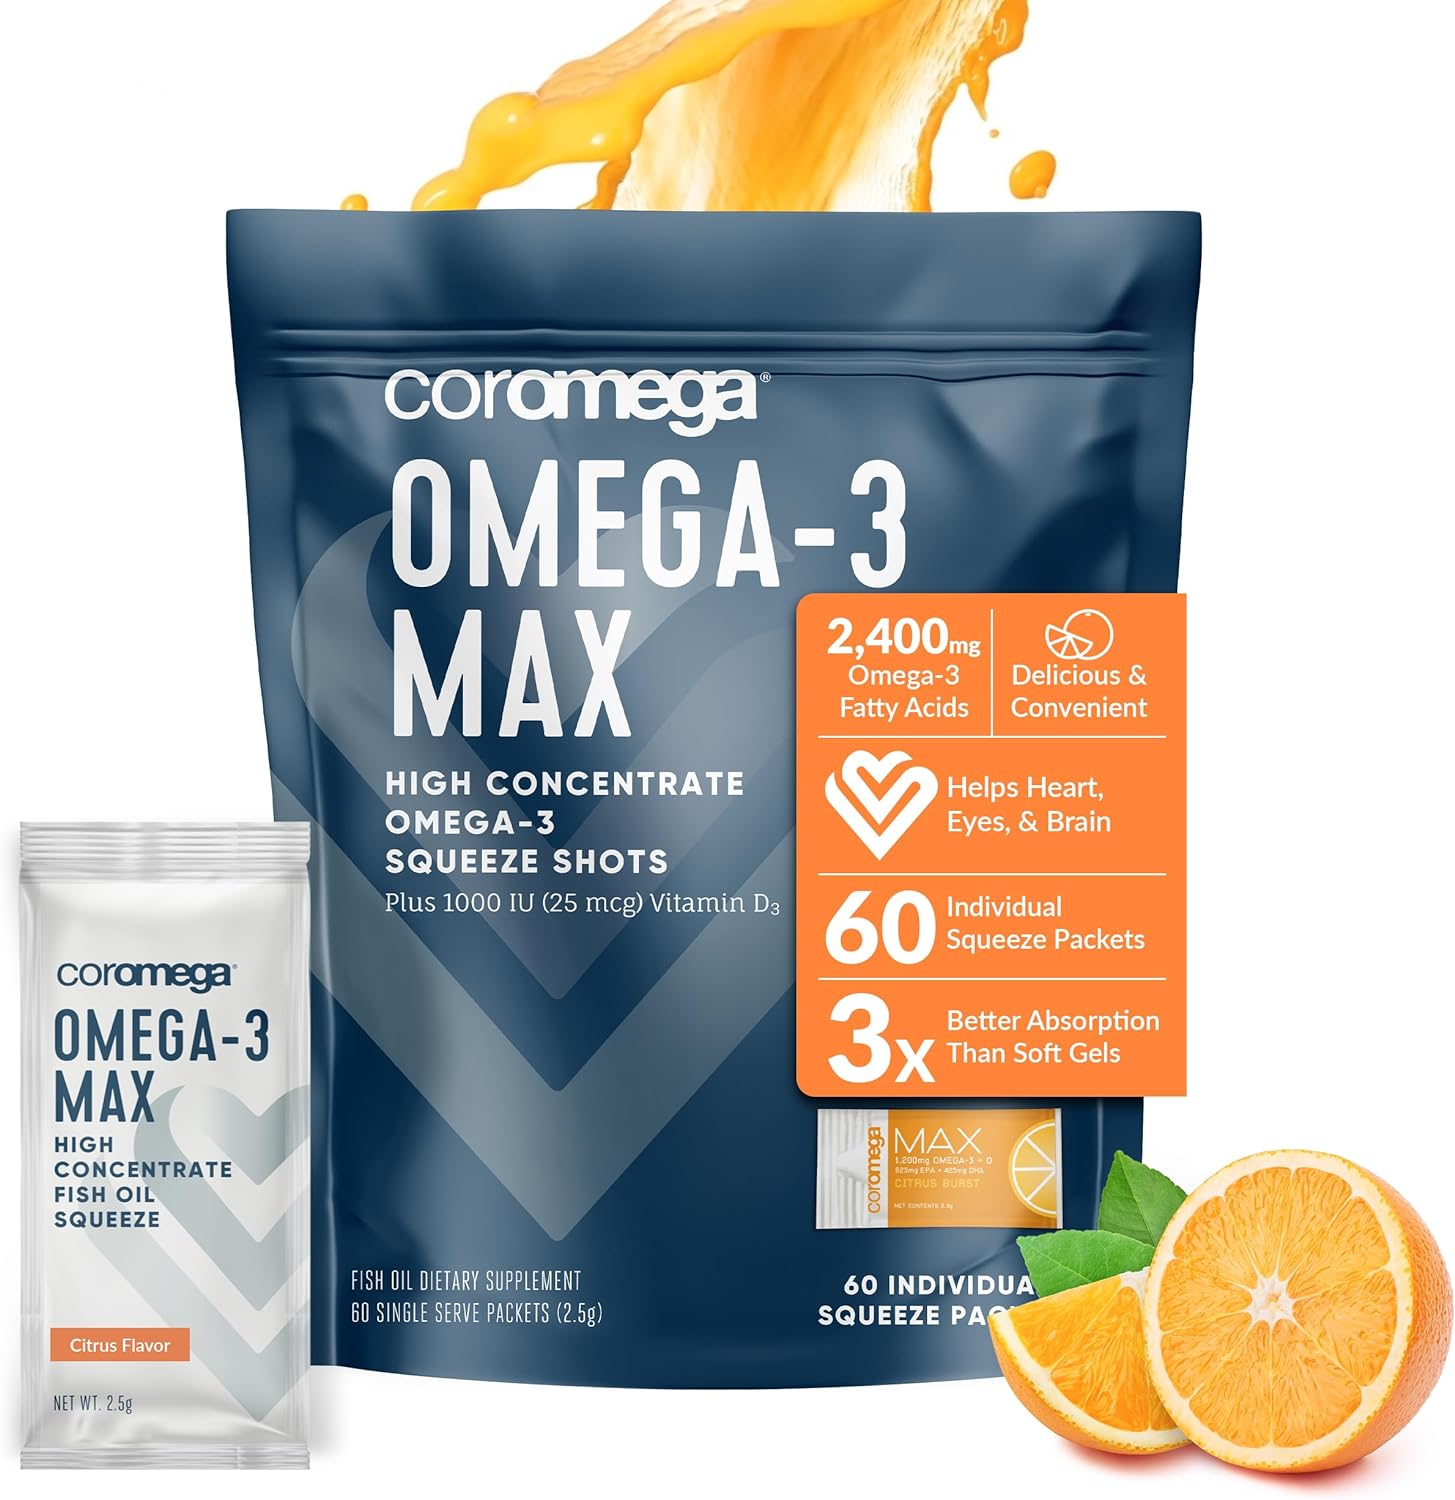 Coromega MAX High Concentrate Omega 3 Fish Oil, 2400mg Omega-3s with 3X Better Absorption Than Softgels, 60 Single Serve